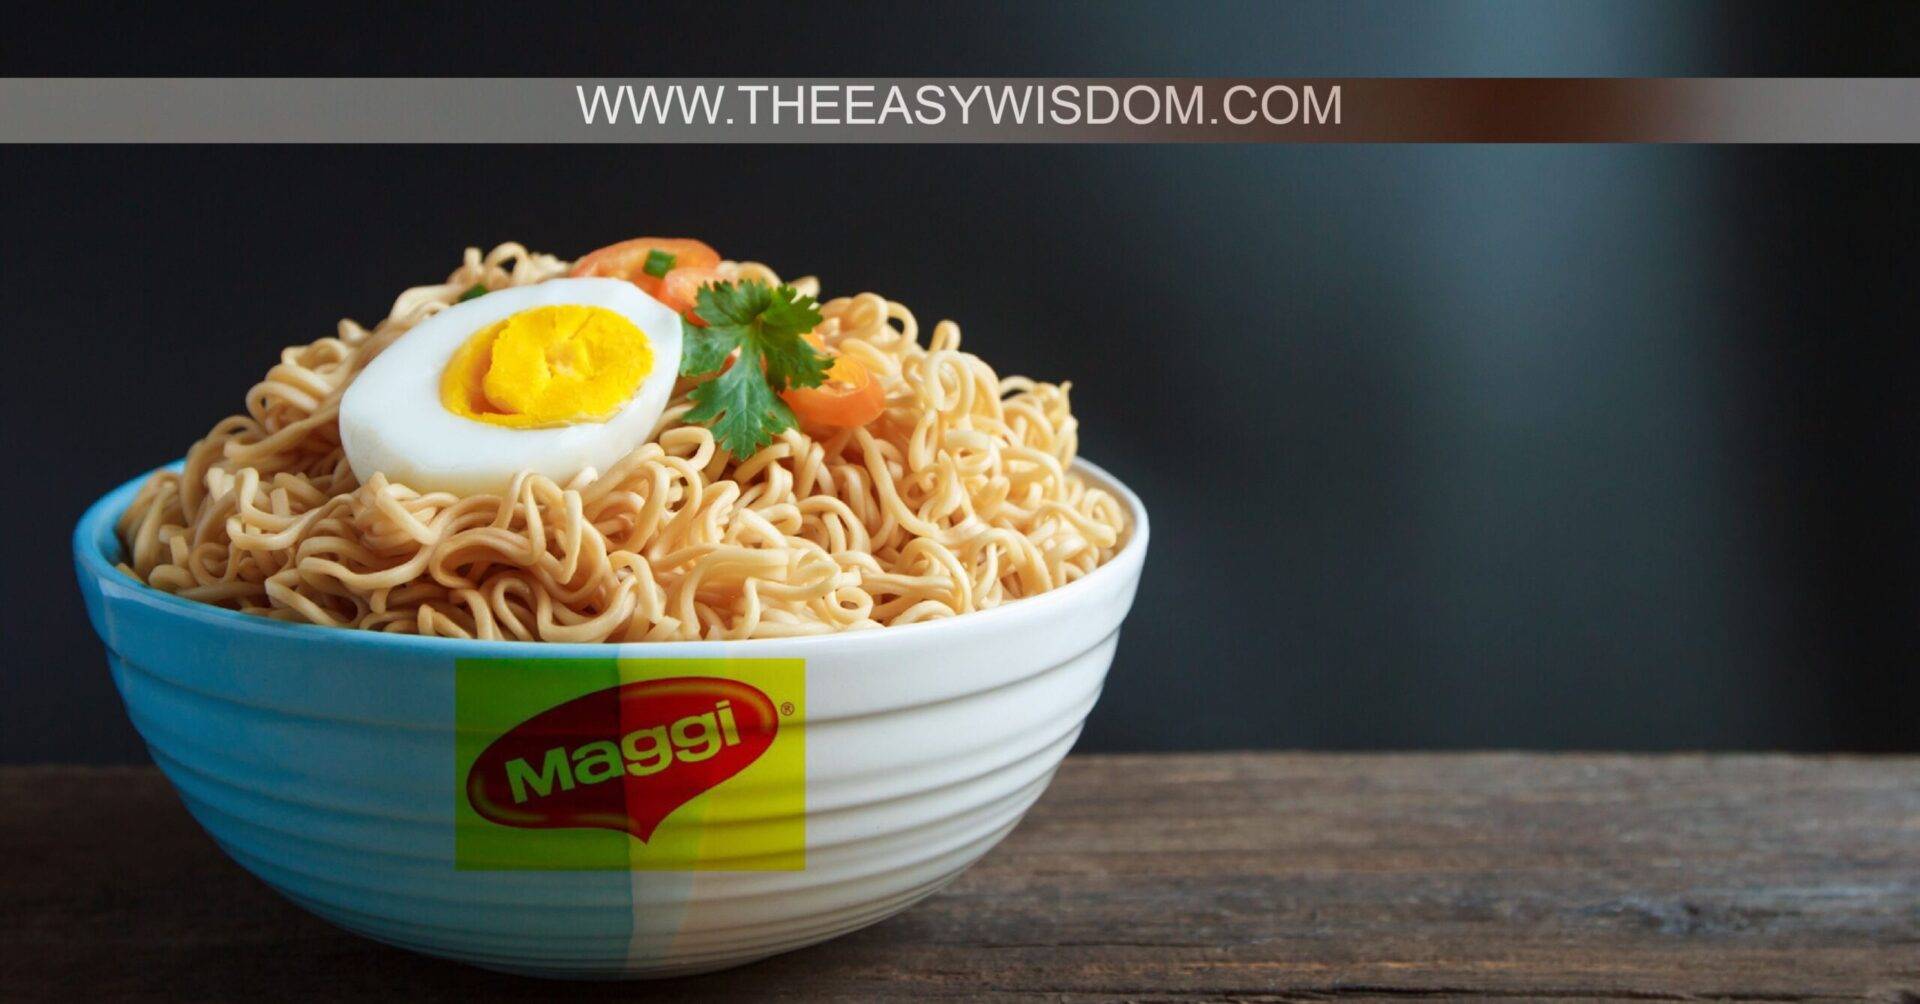 The Maggi Way of Life - Life Lesson from Maggi-WWW.THEEASYWISDOM.COM